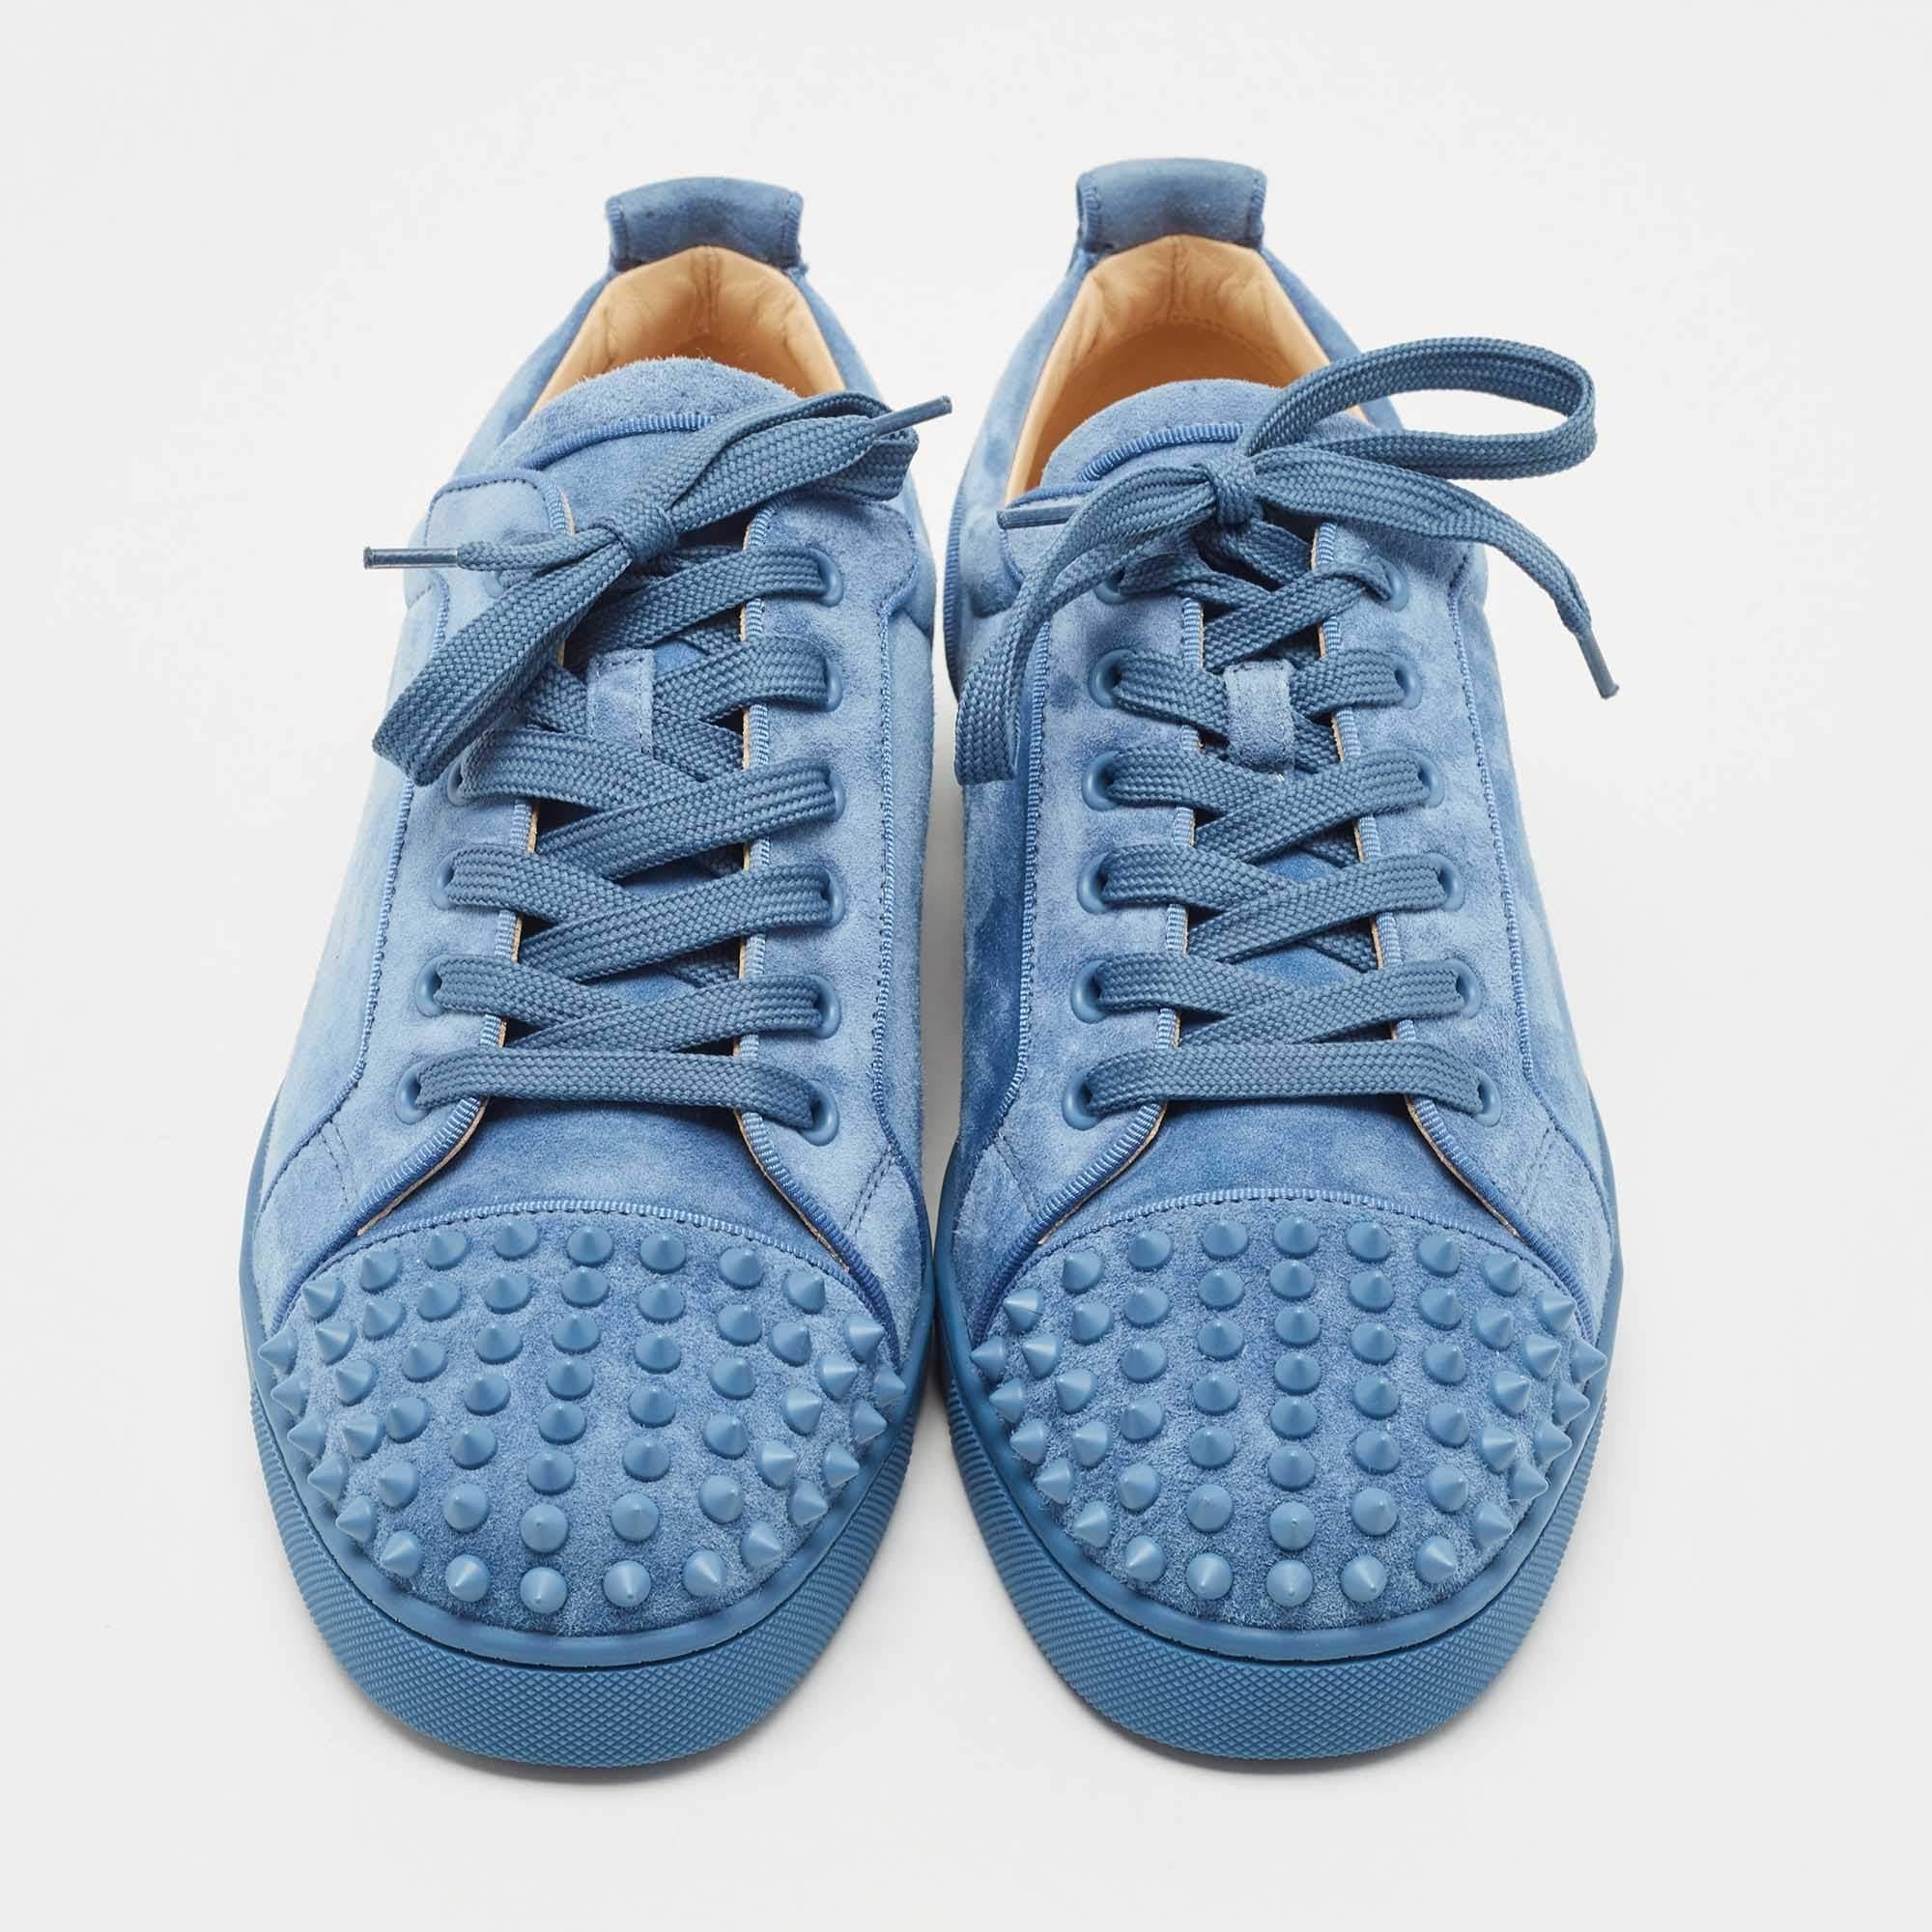 Designed with spikes and crystal embellishments, these Christian Louboutin sneakers are the ultimate favorite of the fashion elite. They've been crafted from suede in a blue shade with a pull tab on the counters. The comfortable sneakers are easy to